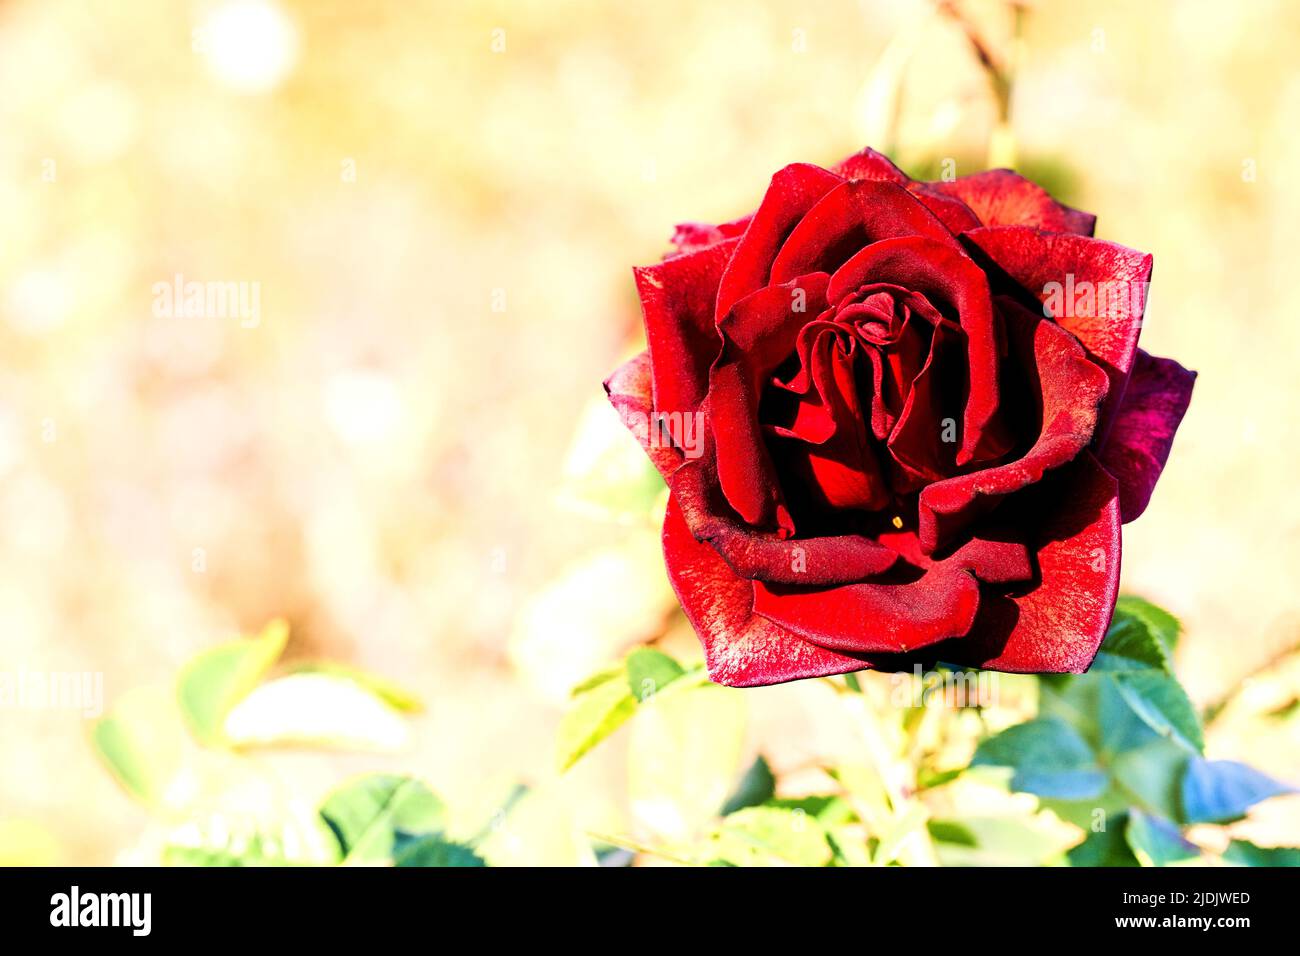 Charming delicate rose on a yellow pleasant background Stock Photo - Alamy